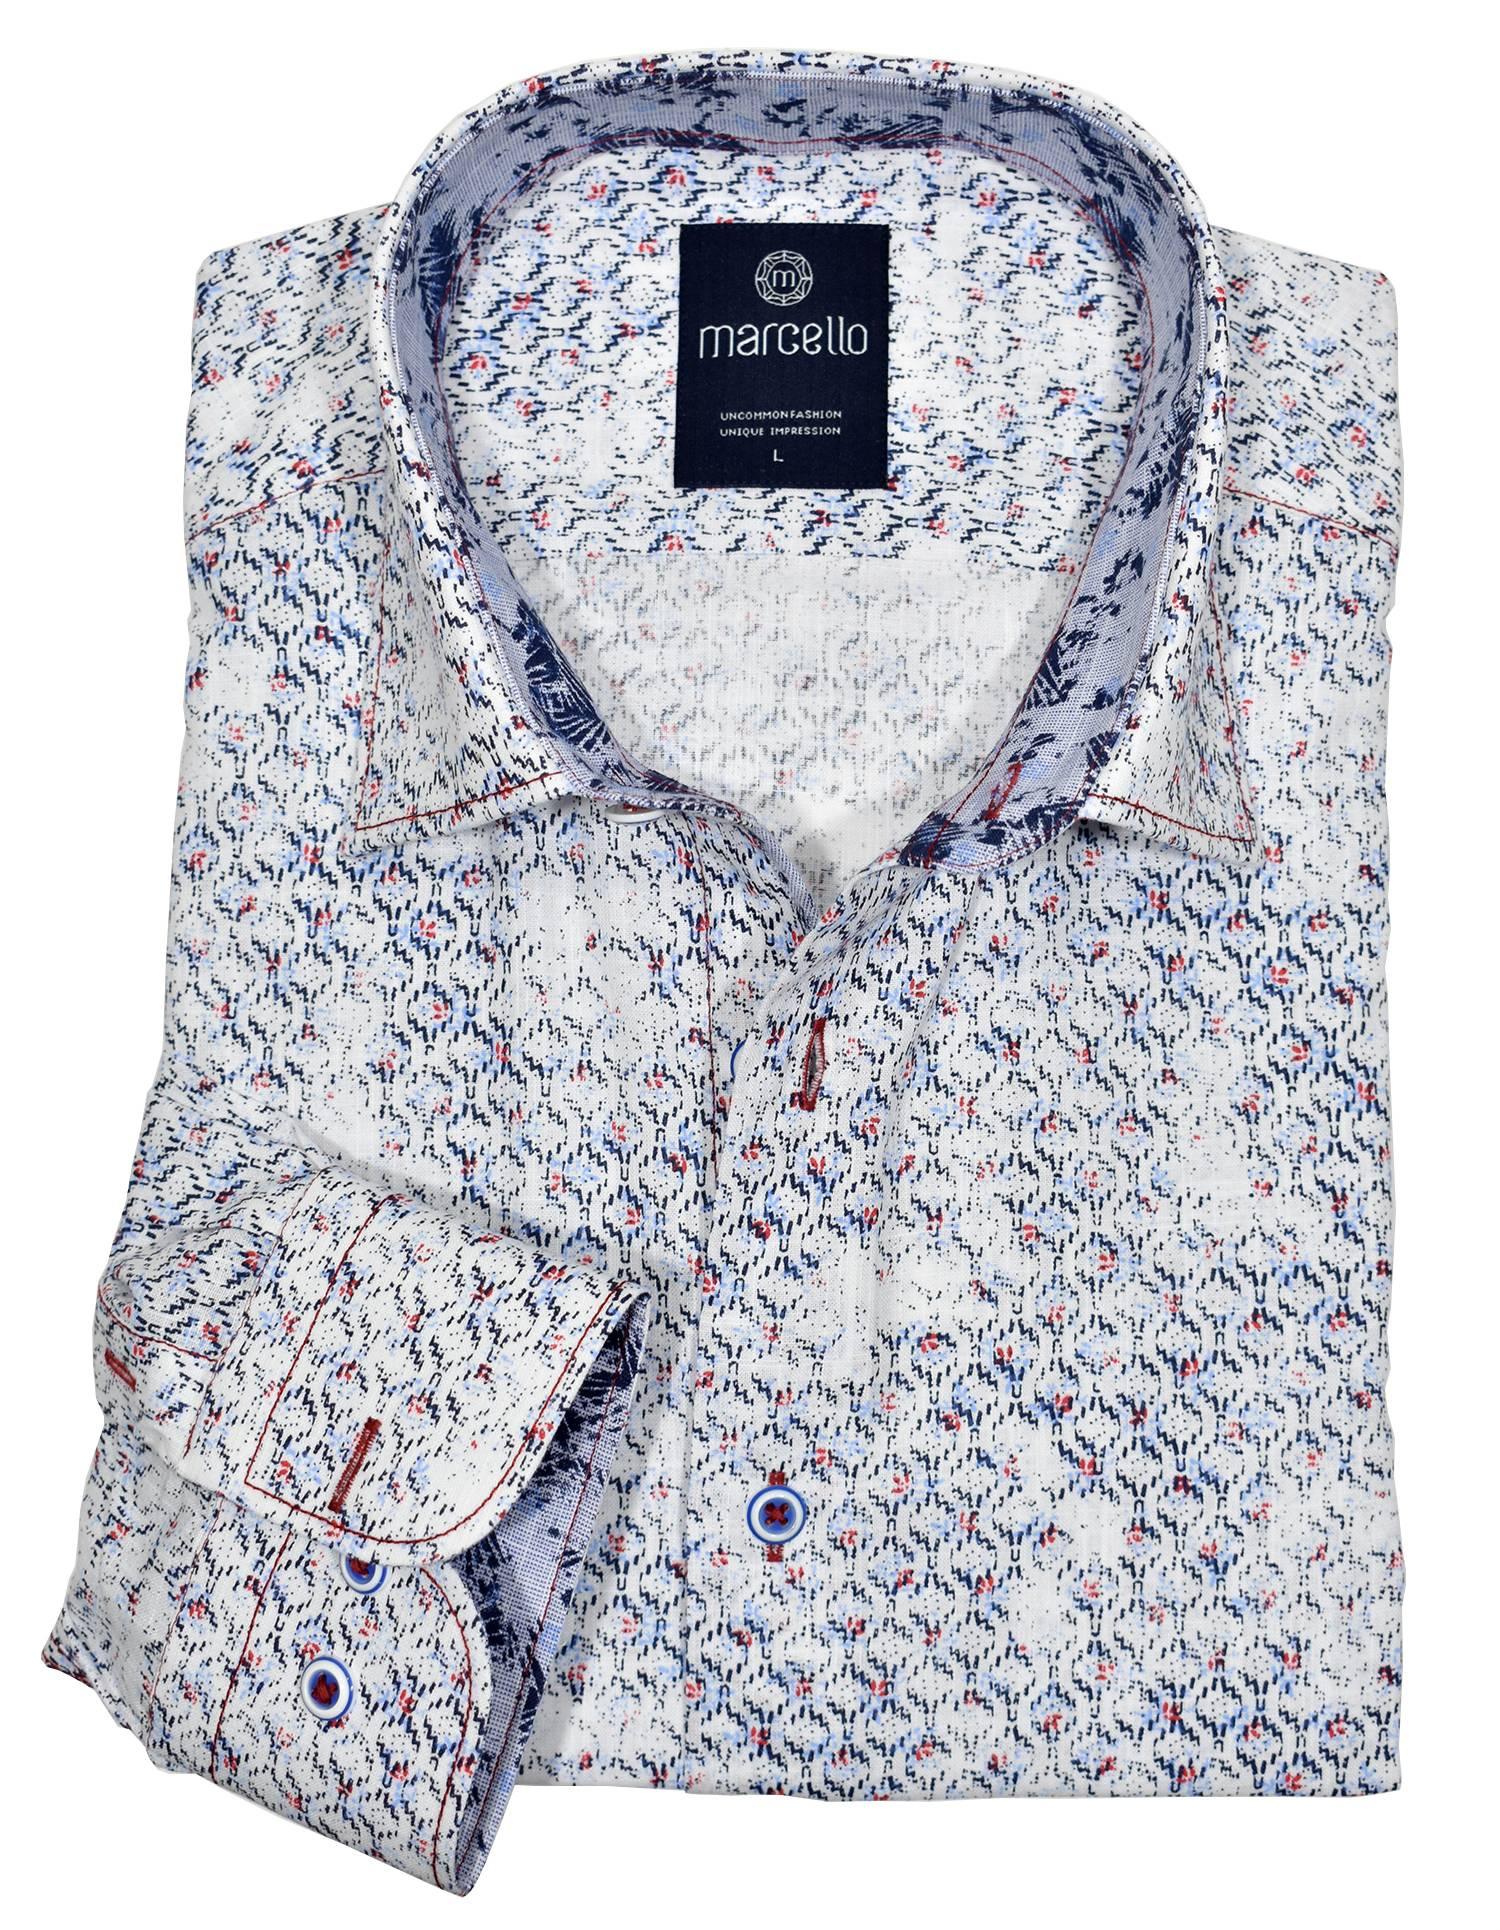 Exclusive soft cotton fabric. Unique, colorful fractured print. Excellent sport shirt with jeans. Classic trim fabric. Cool red stitching. Custom selected buttons. 2 button signature cuffs. Classic shaped fit.  Shirt by Marcello Sport.